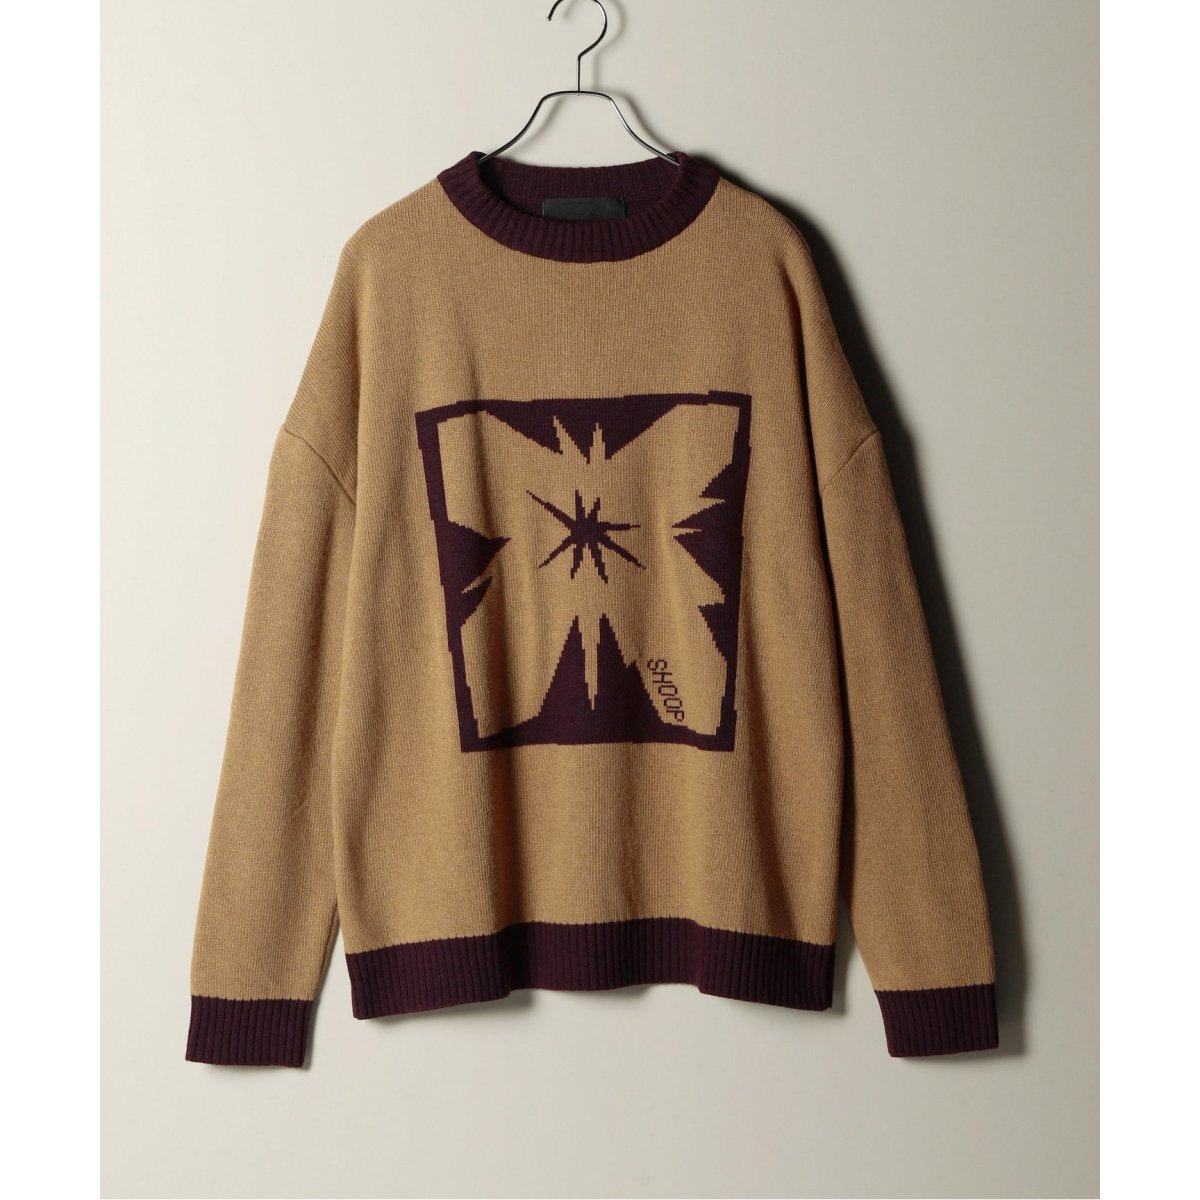 SHOOP, BUTTERFLY REVERSIBLE SWEATER 21AW